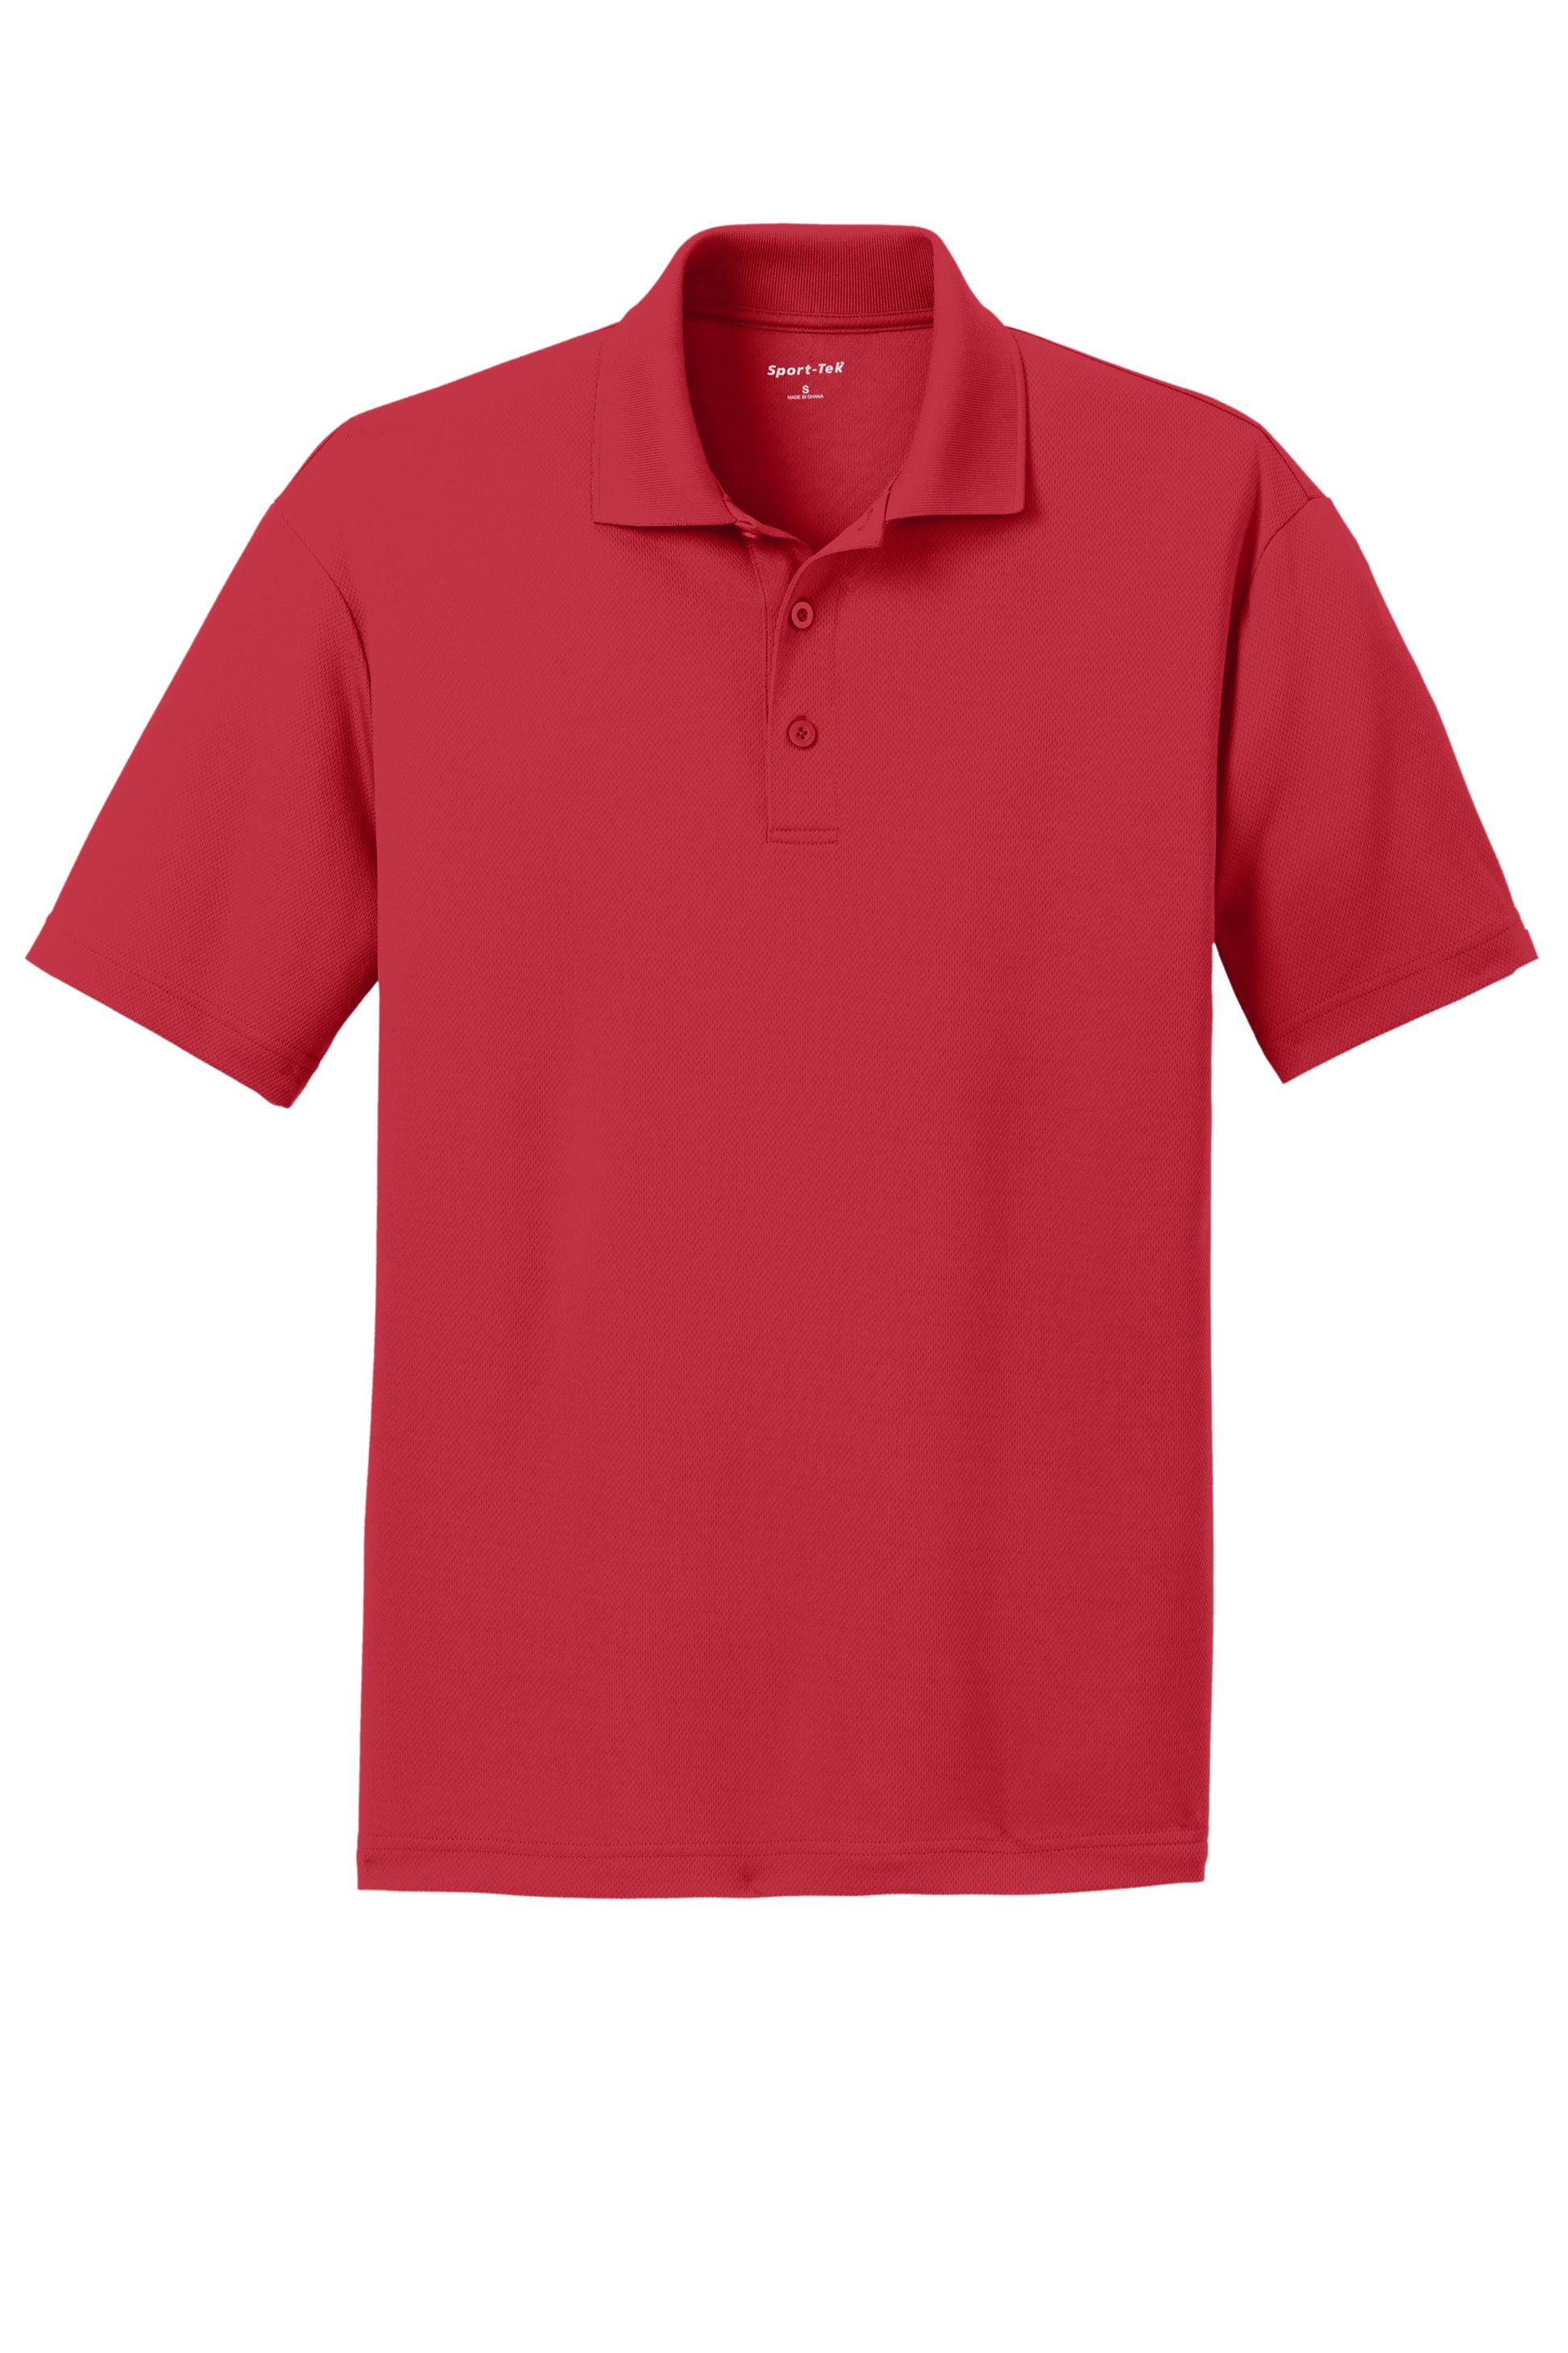 New TRUE Athletic Polo Shirt Men's Small - All sizes available